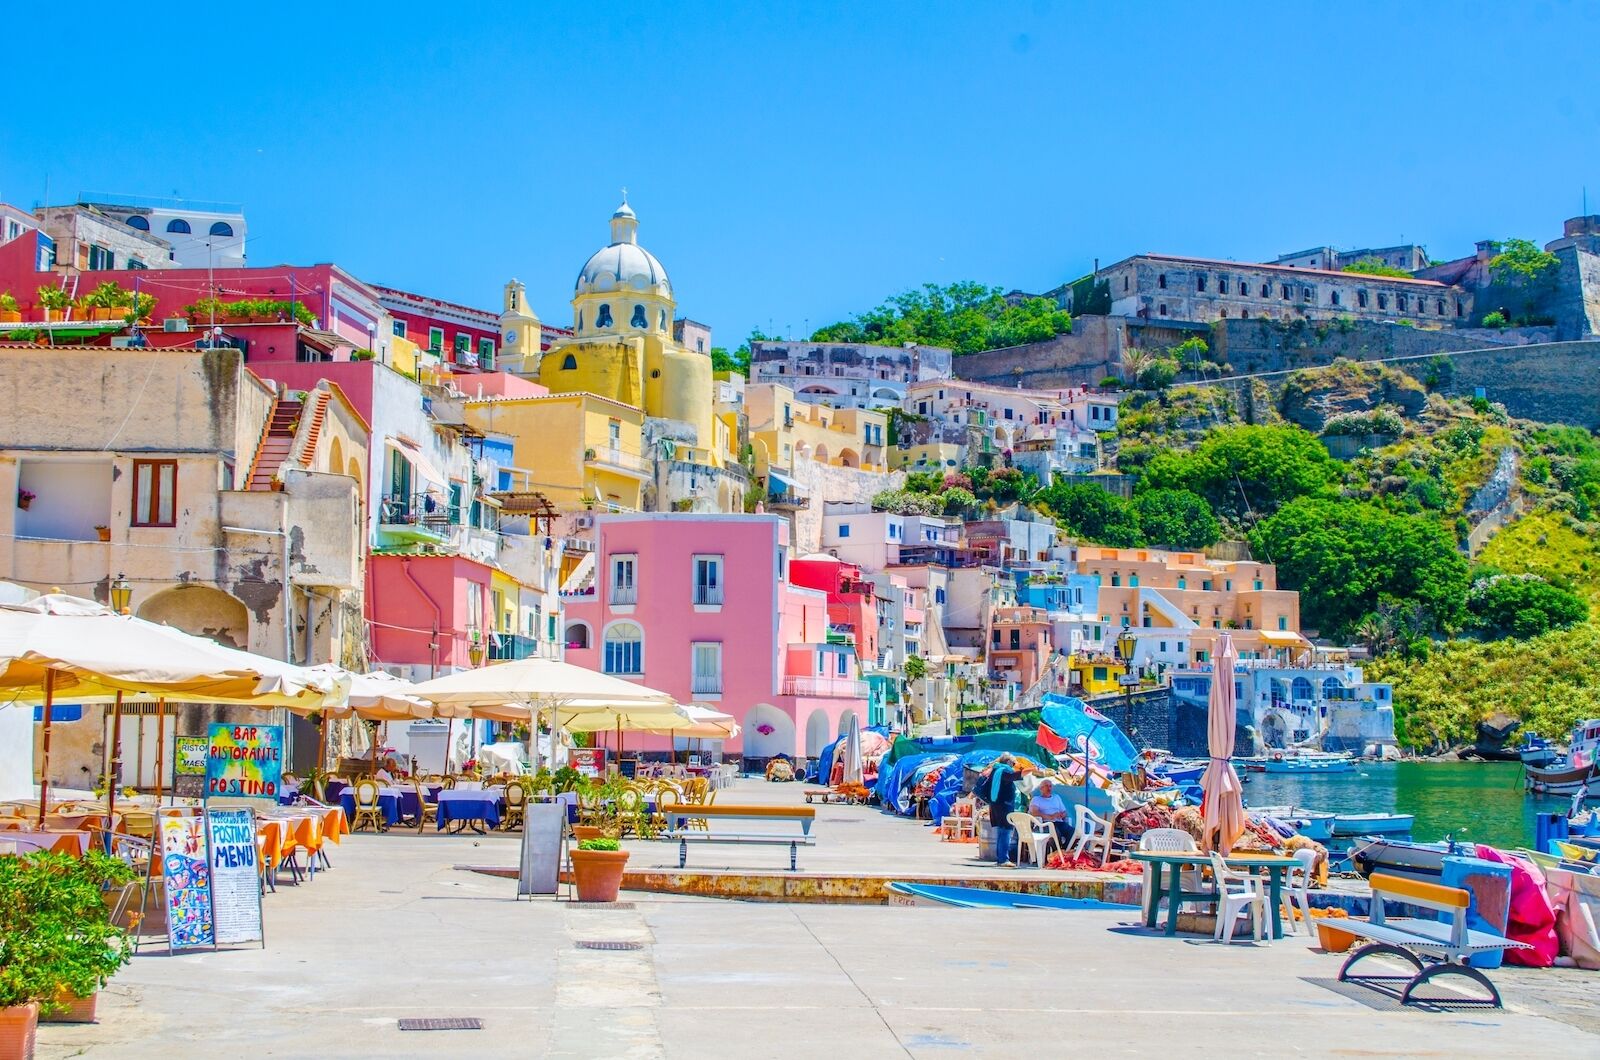 procida-italy-marina-and-sidewalk with restaurants and colorful buildings